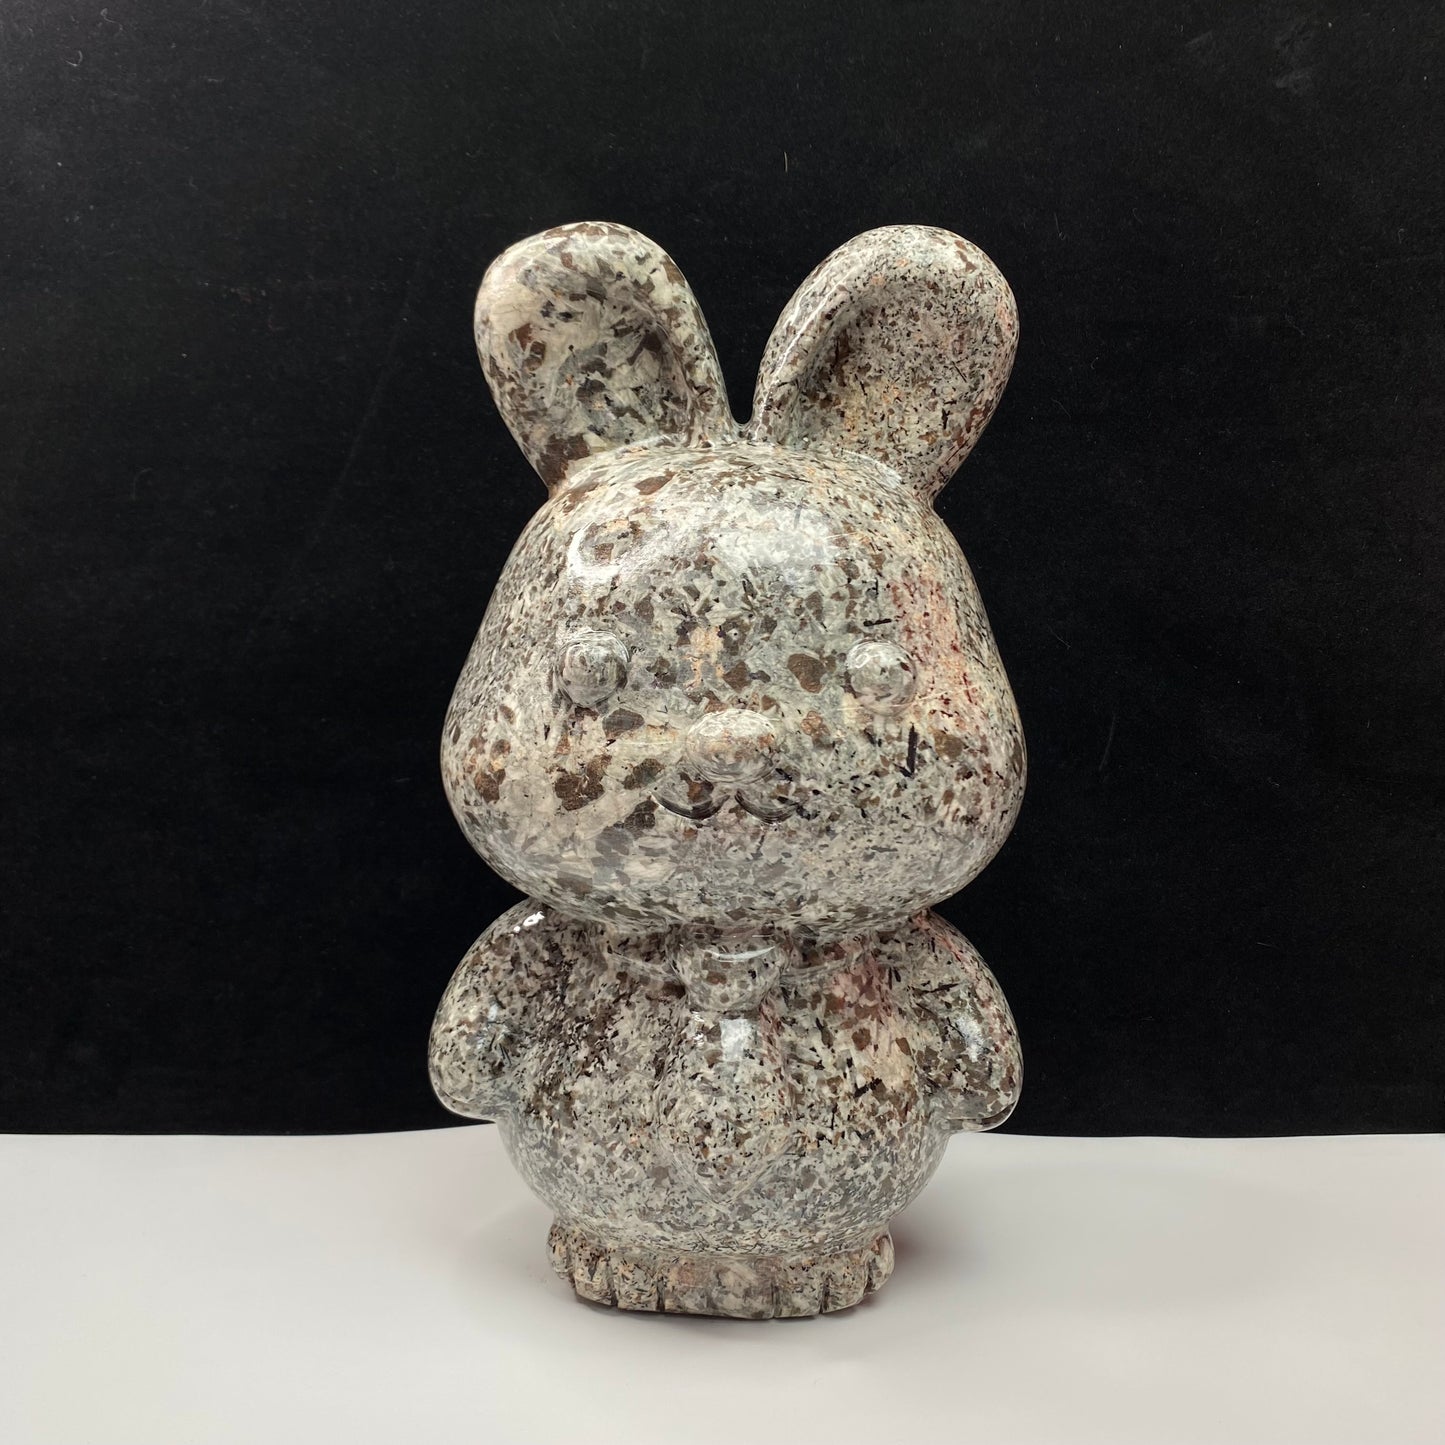 511-Large Carving Yooperlite with a tie a cute bunny rabbit